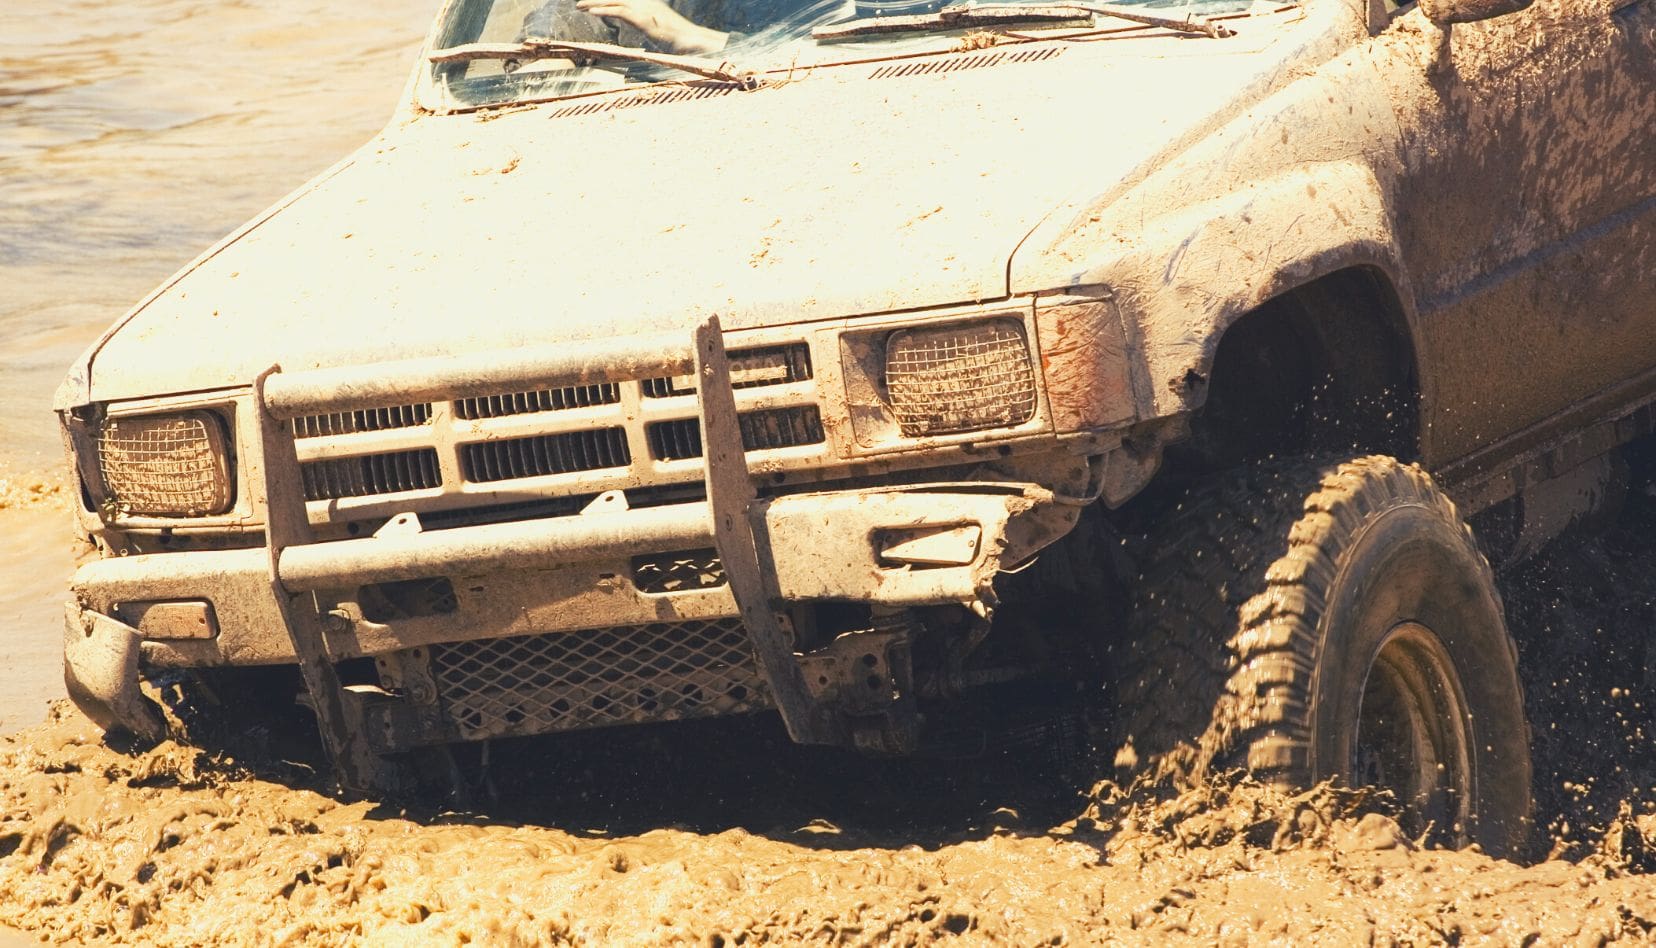 Bogged 4x4 on a road trip